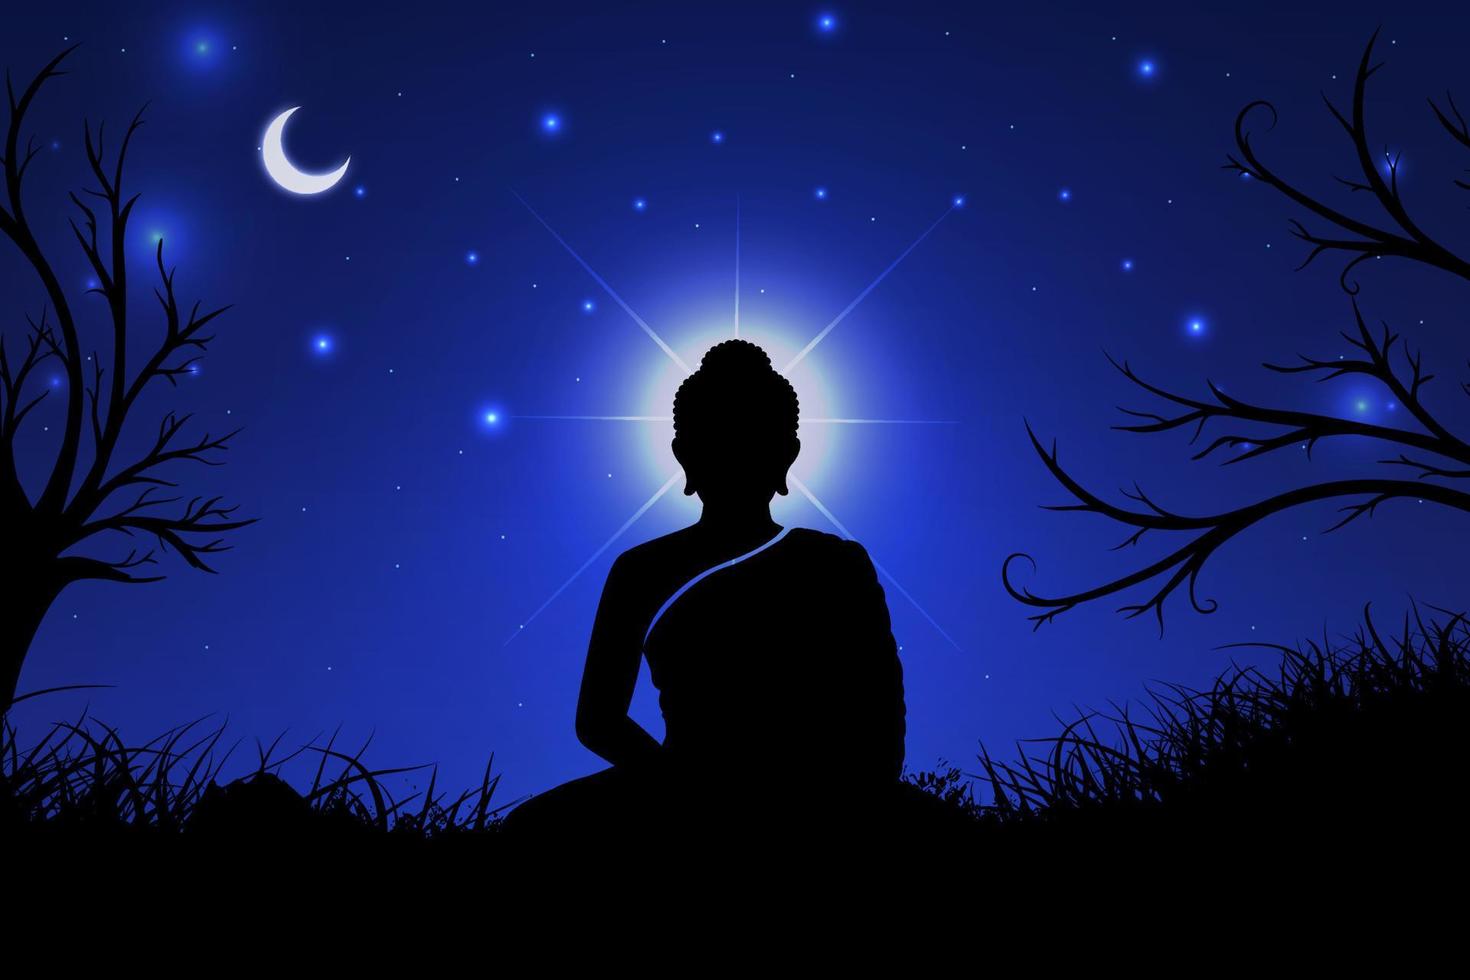 Shinny Lord Buddha with starry night background. Vesak day design with star, Crescent moon and silhouette buddha. vector